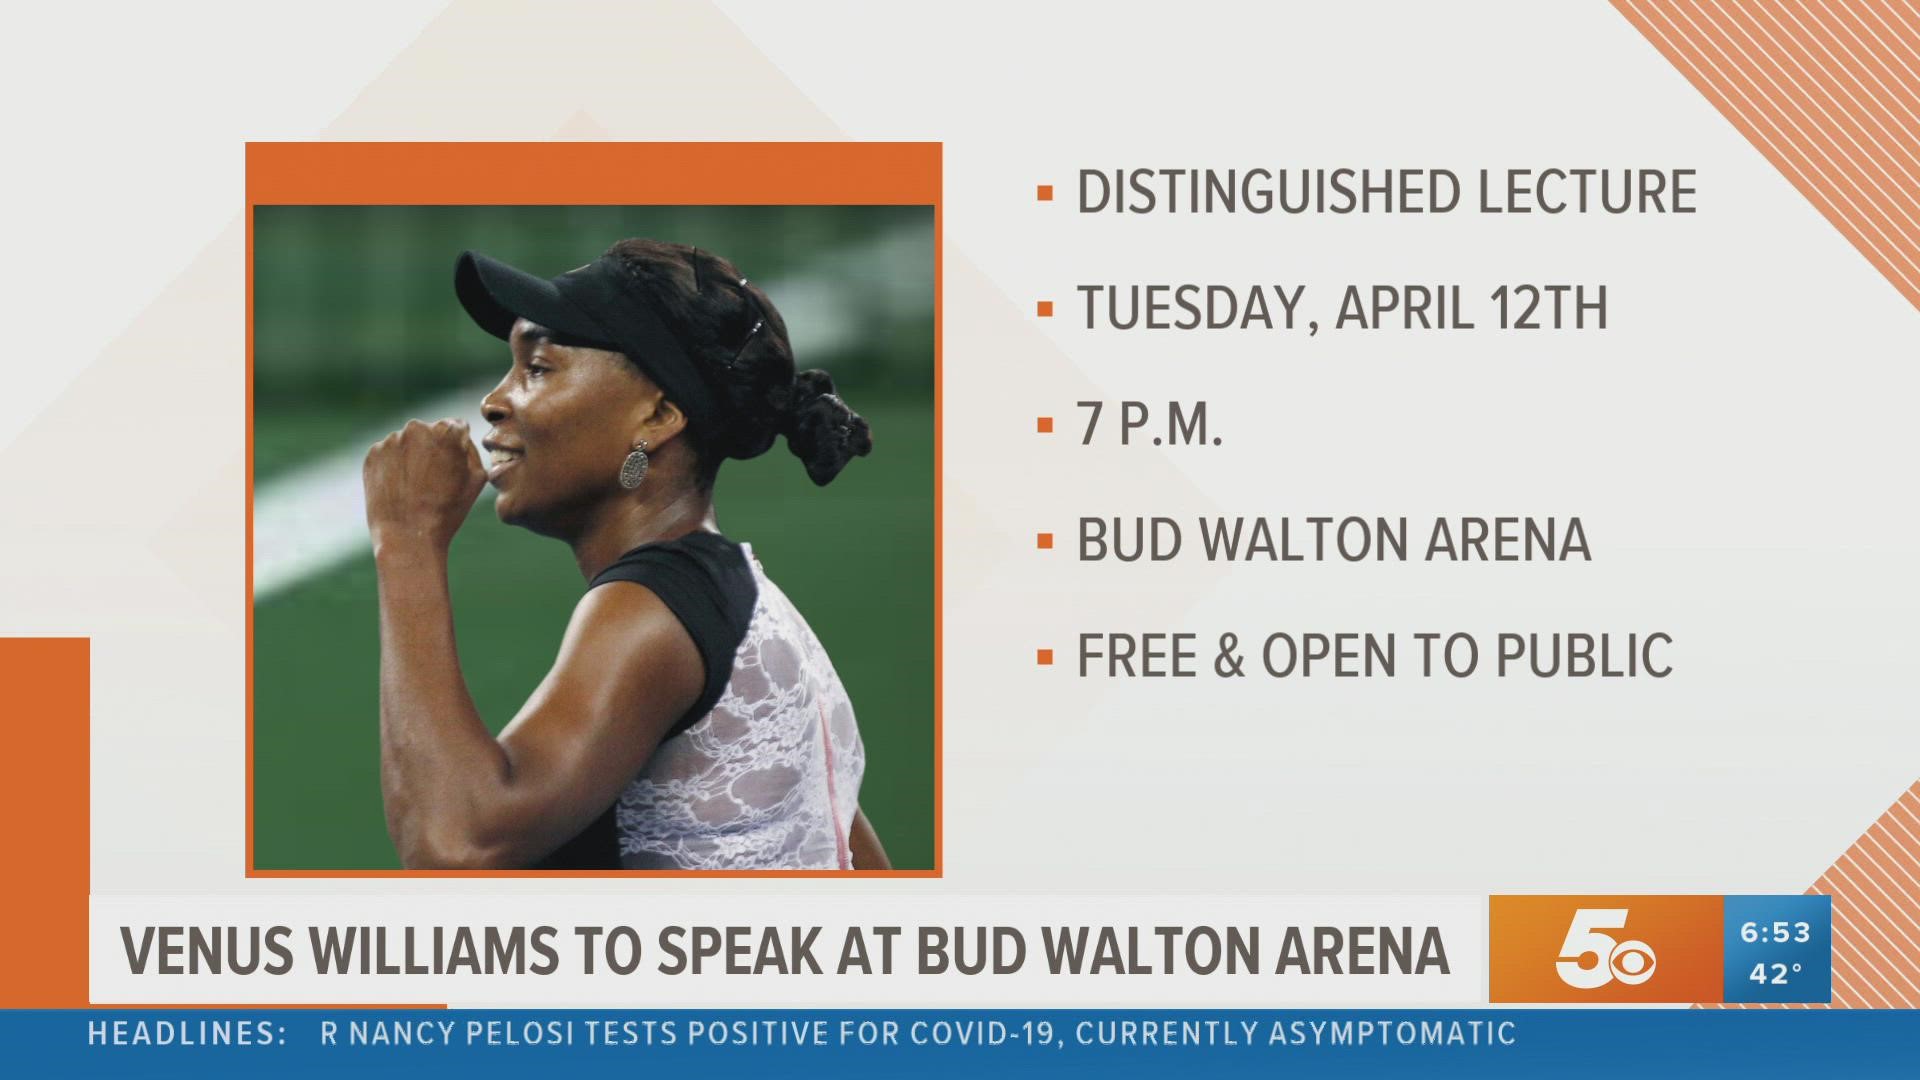 Moderated by Danyelle Musselman, Venus Williams will give a distinguished lecture at the University of Arkansas on April 12.